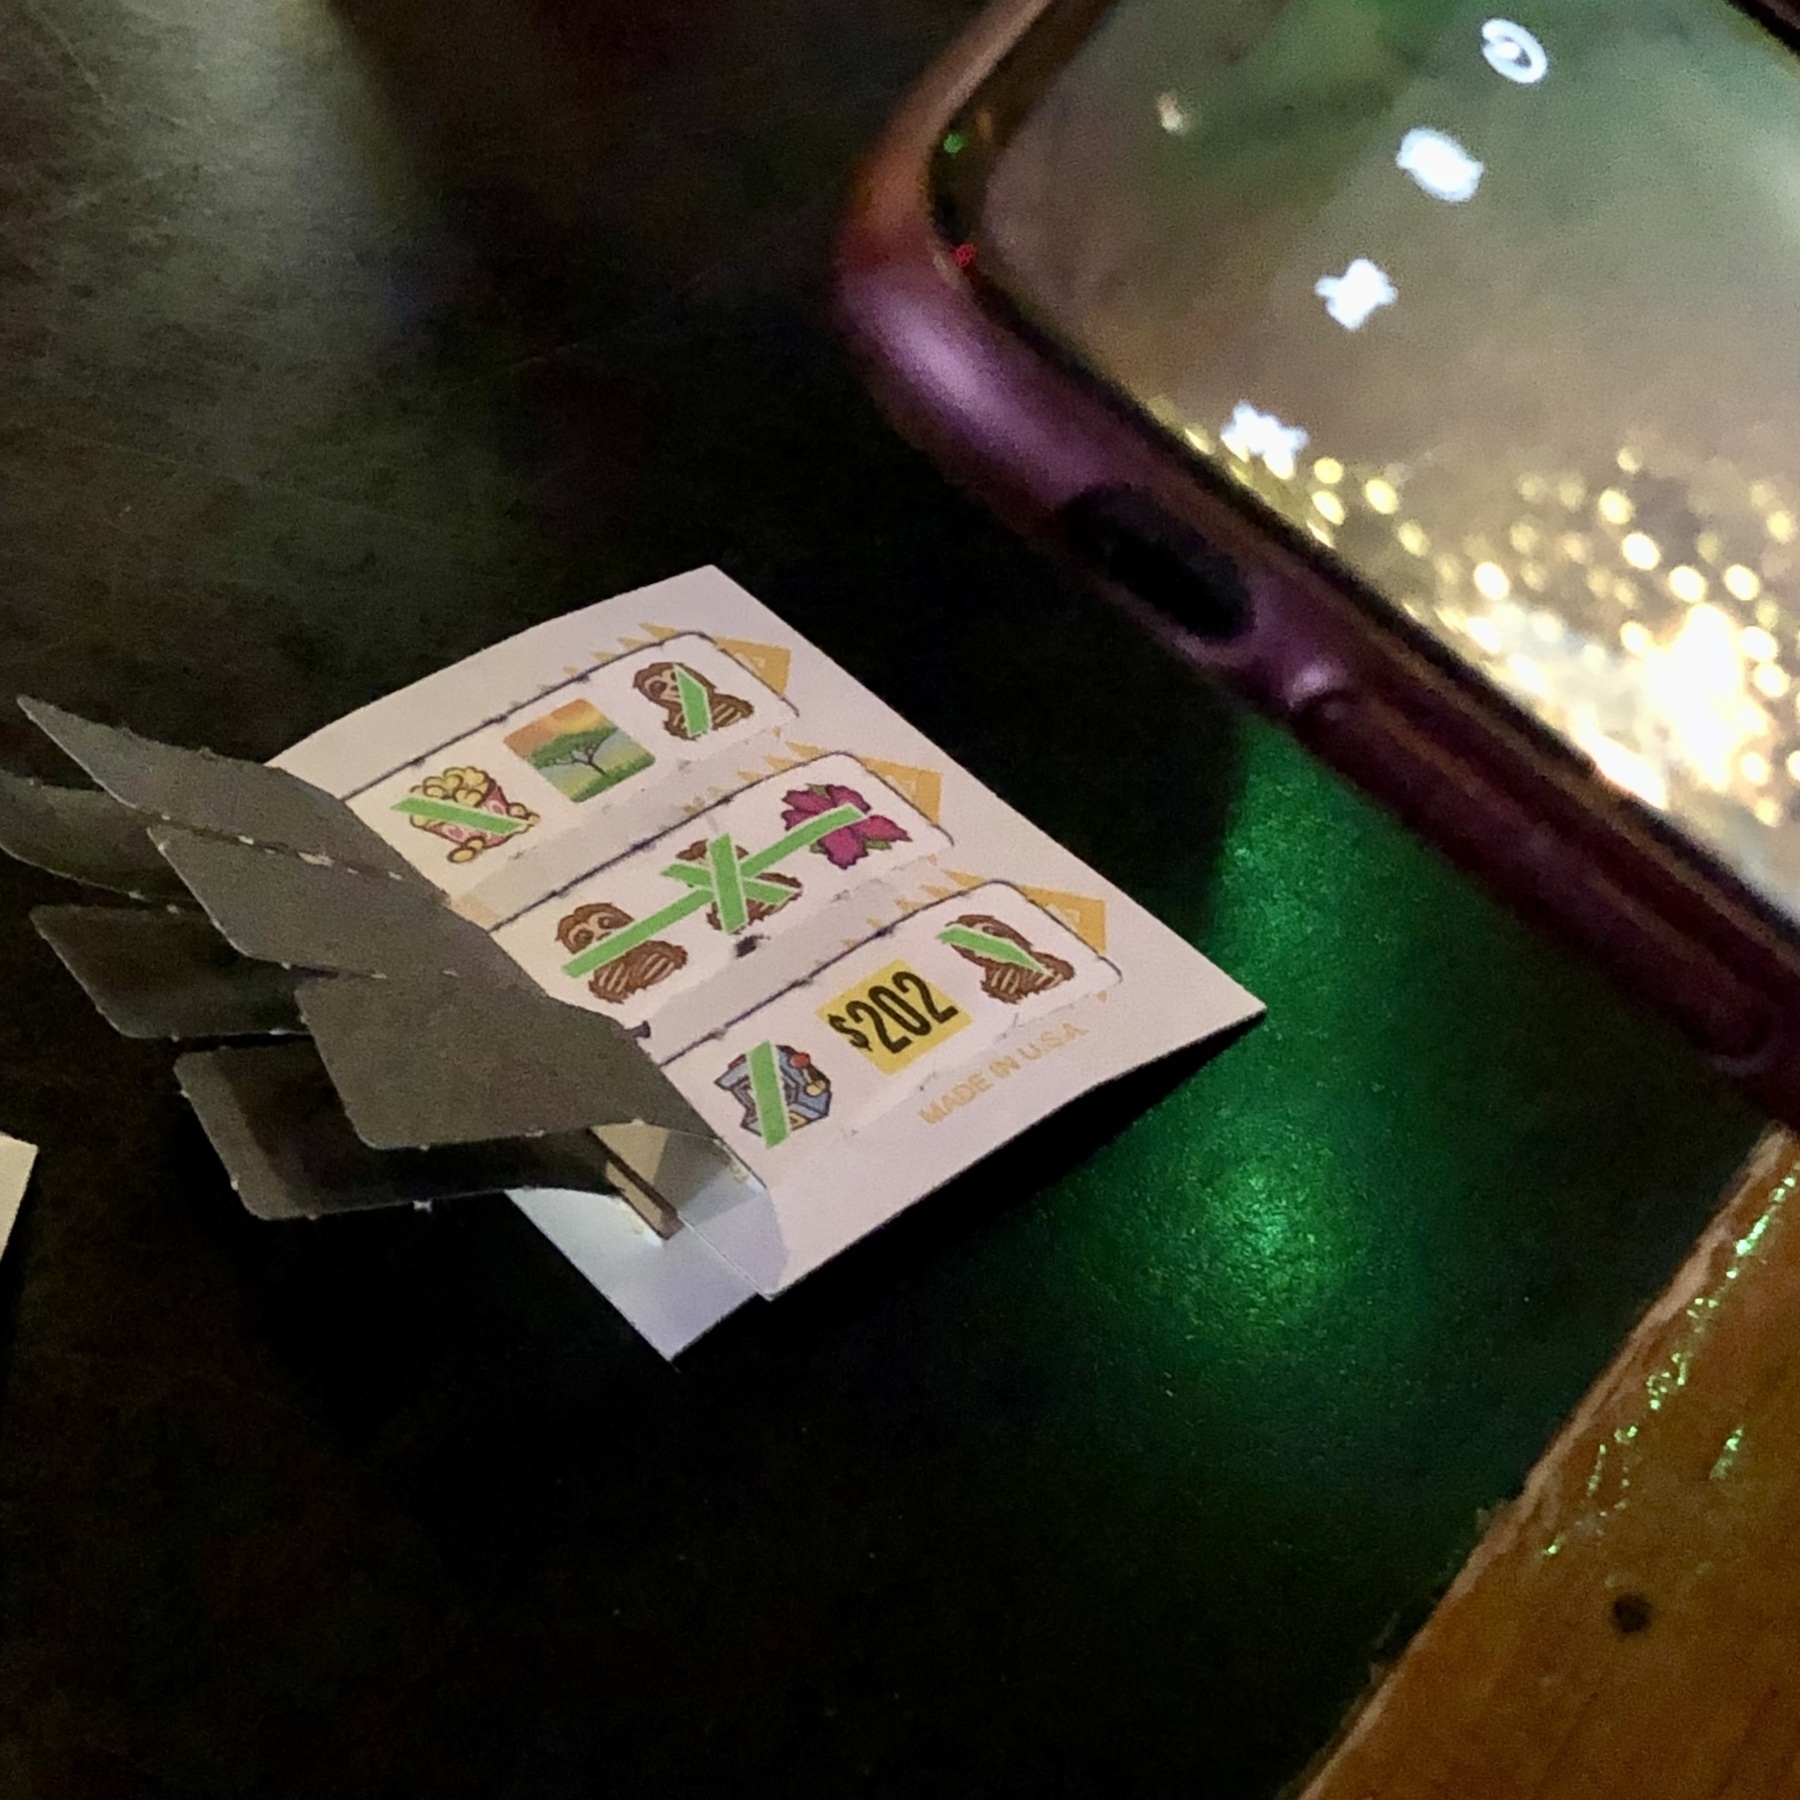 opened pull-tab win in dimly lit bar